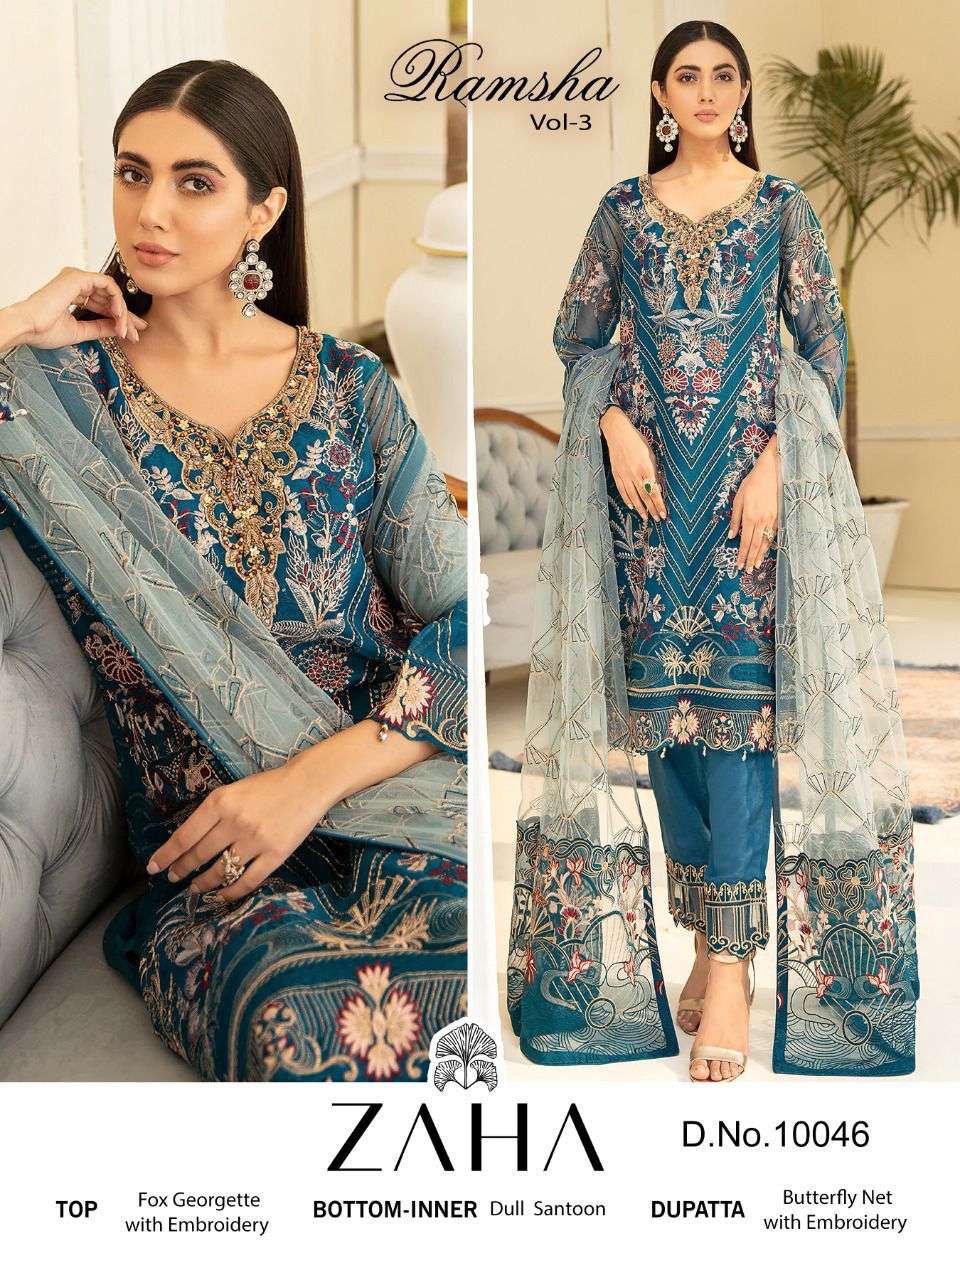 ZAHA RAMSHA VOL 3 DESIGNER GEORGETTE EMBROIDERED PARTY WEAR SUITS IN WHOLESALE RATE